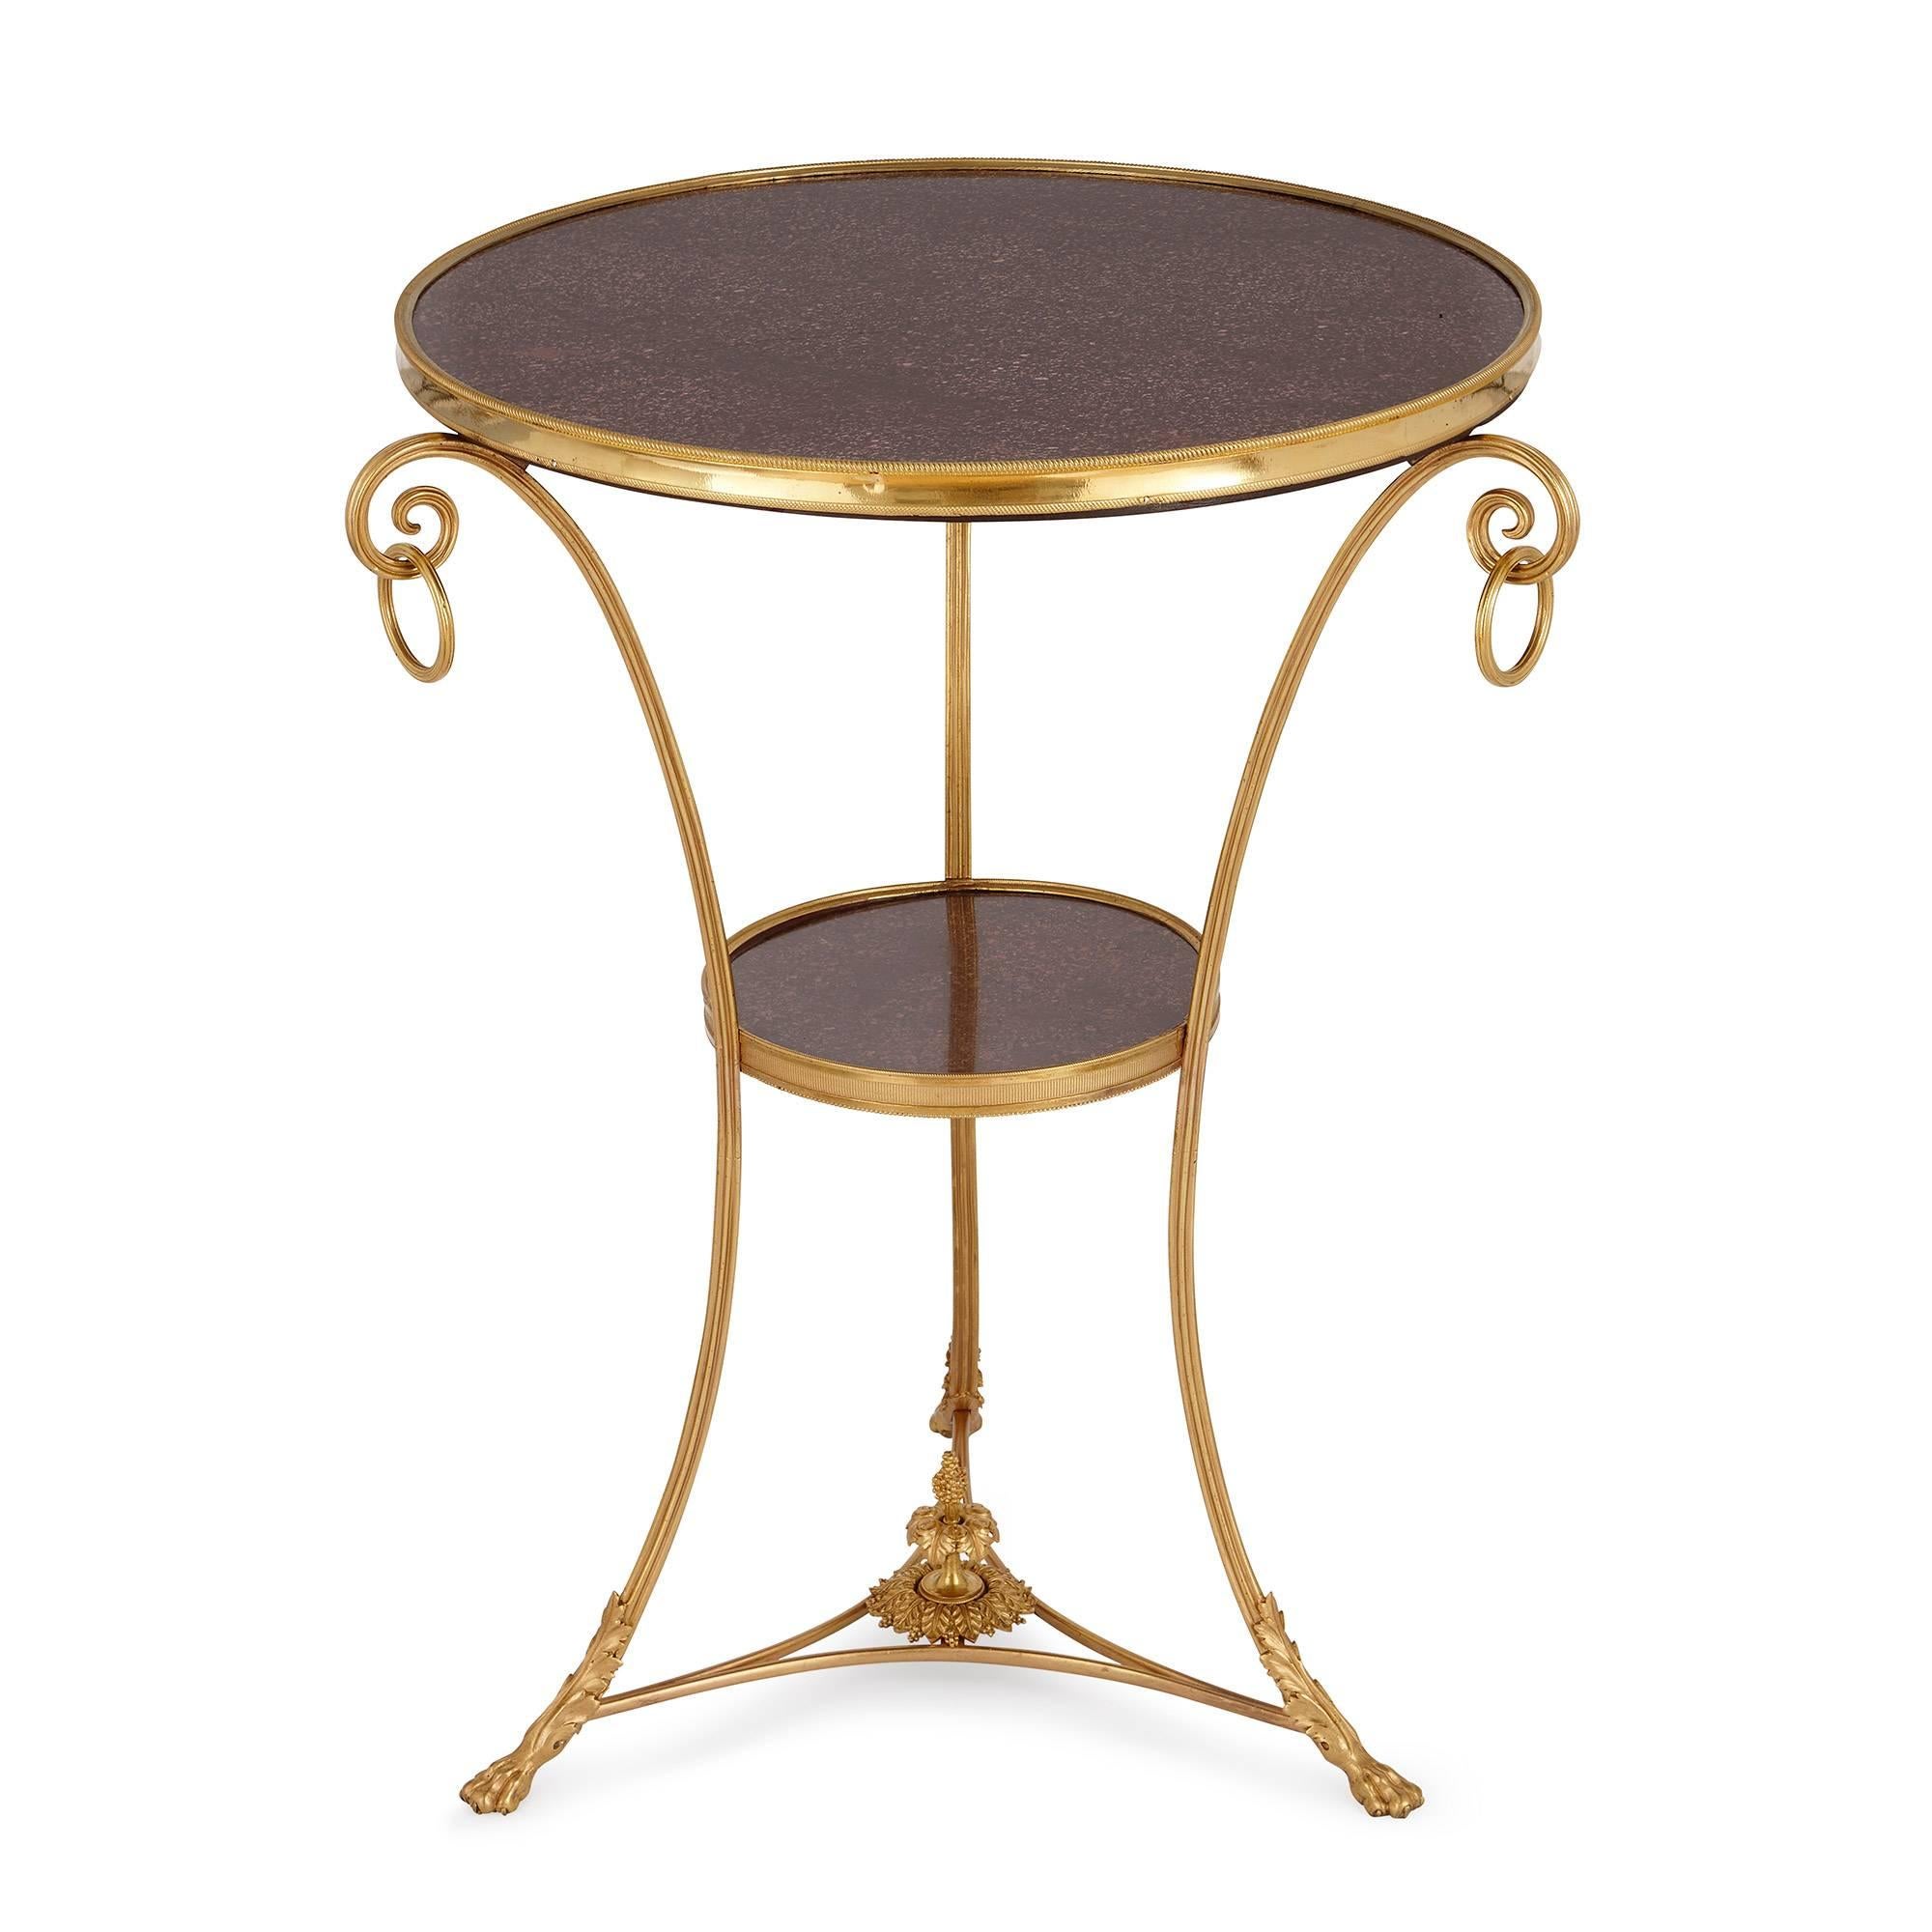 The circular porphyry top with ormolu band, on three curved legs joined by a small circular porphyry shelf in the middle, ending in paw feet.

The beauty of this circular gueridon is in its refined simplicity of design, allowing the highly prized